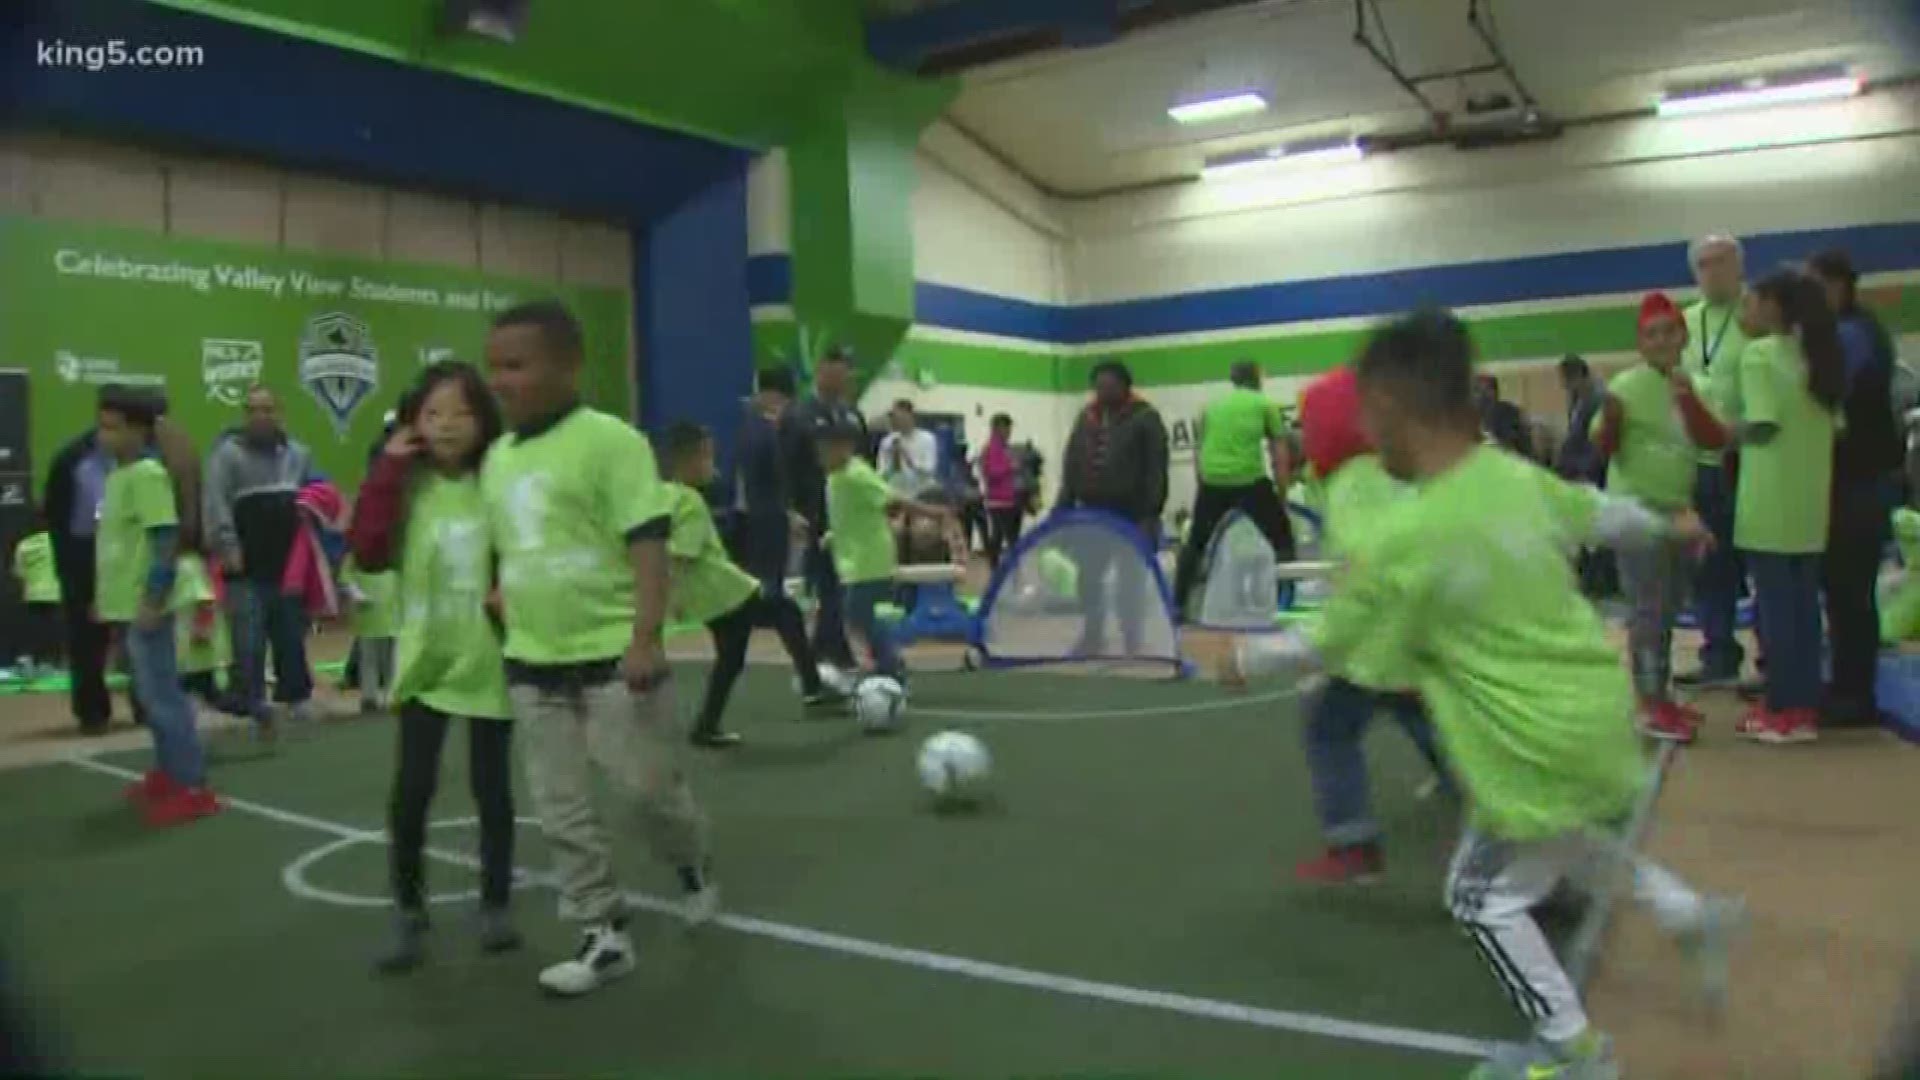 While the Sounders are taking time to prepare for the MLS Cup final, they're also giving back to the community.